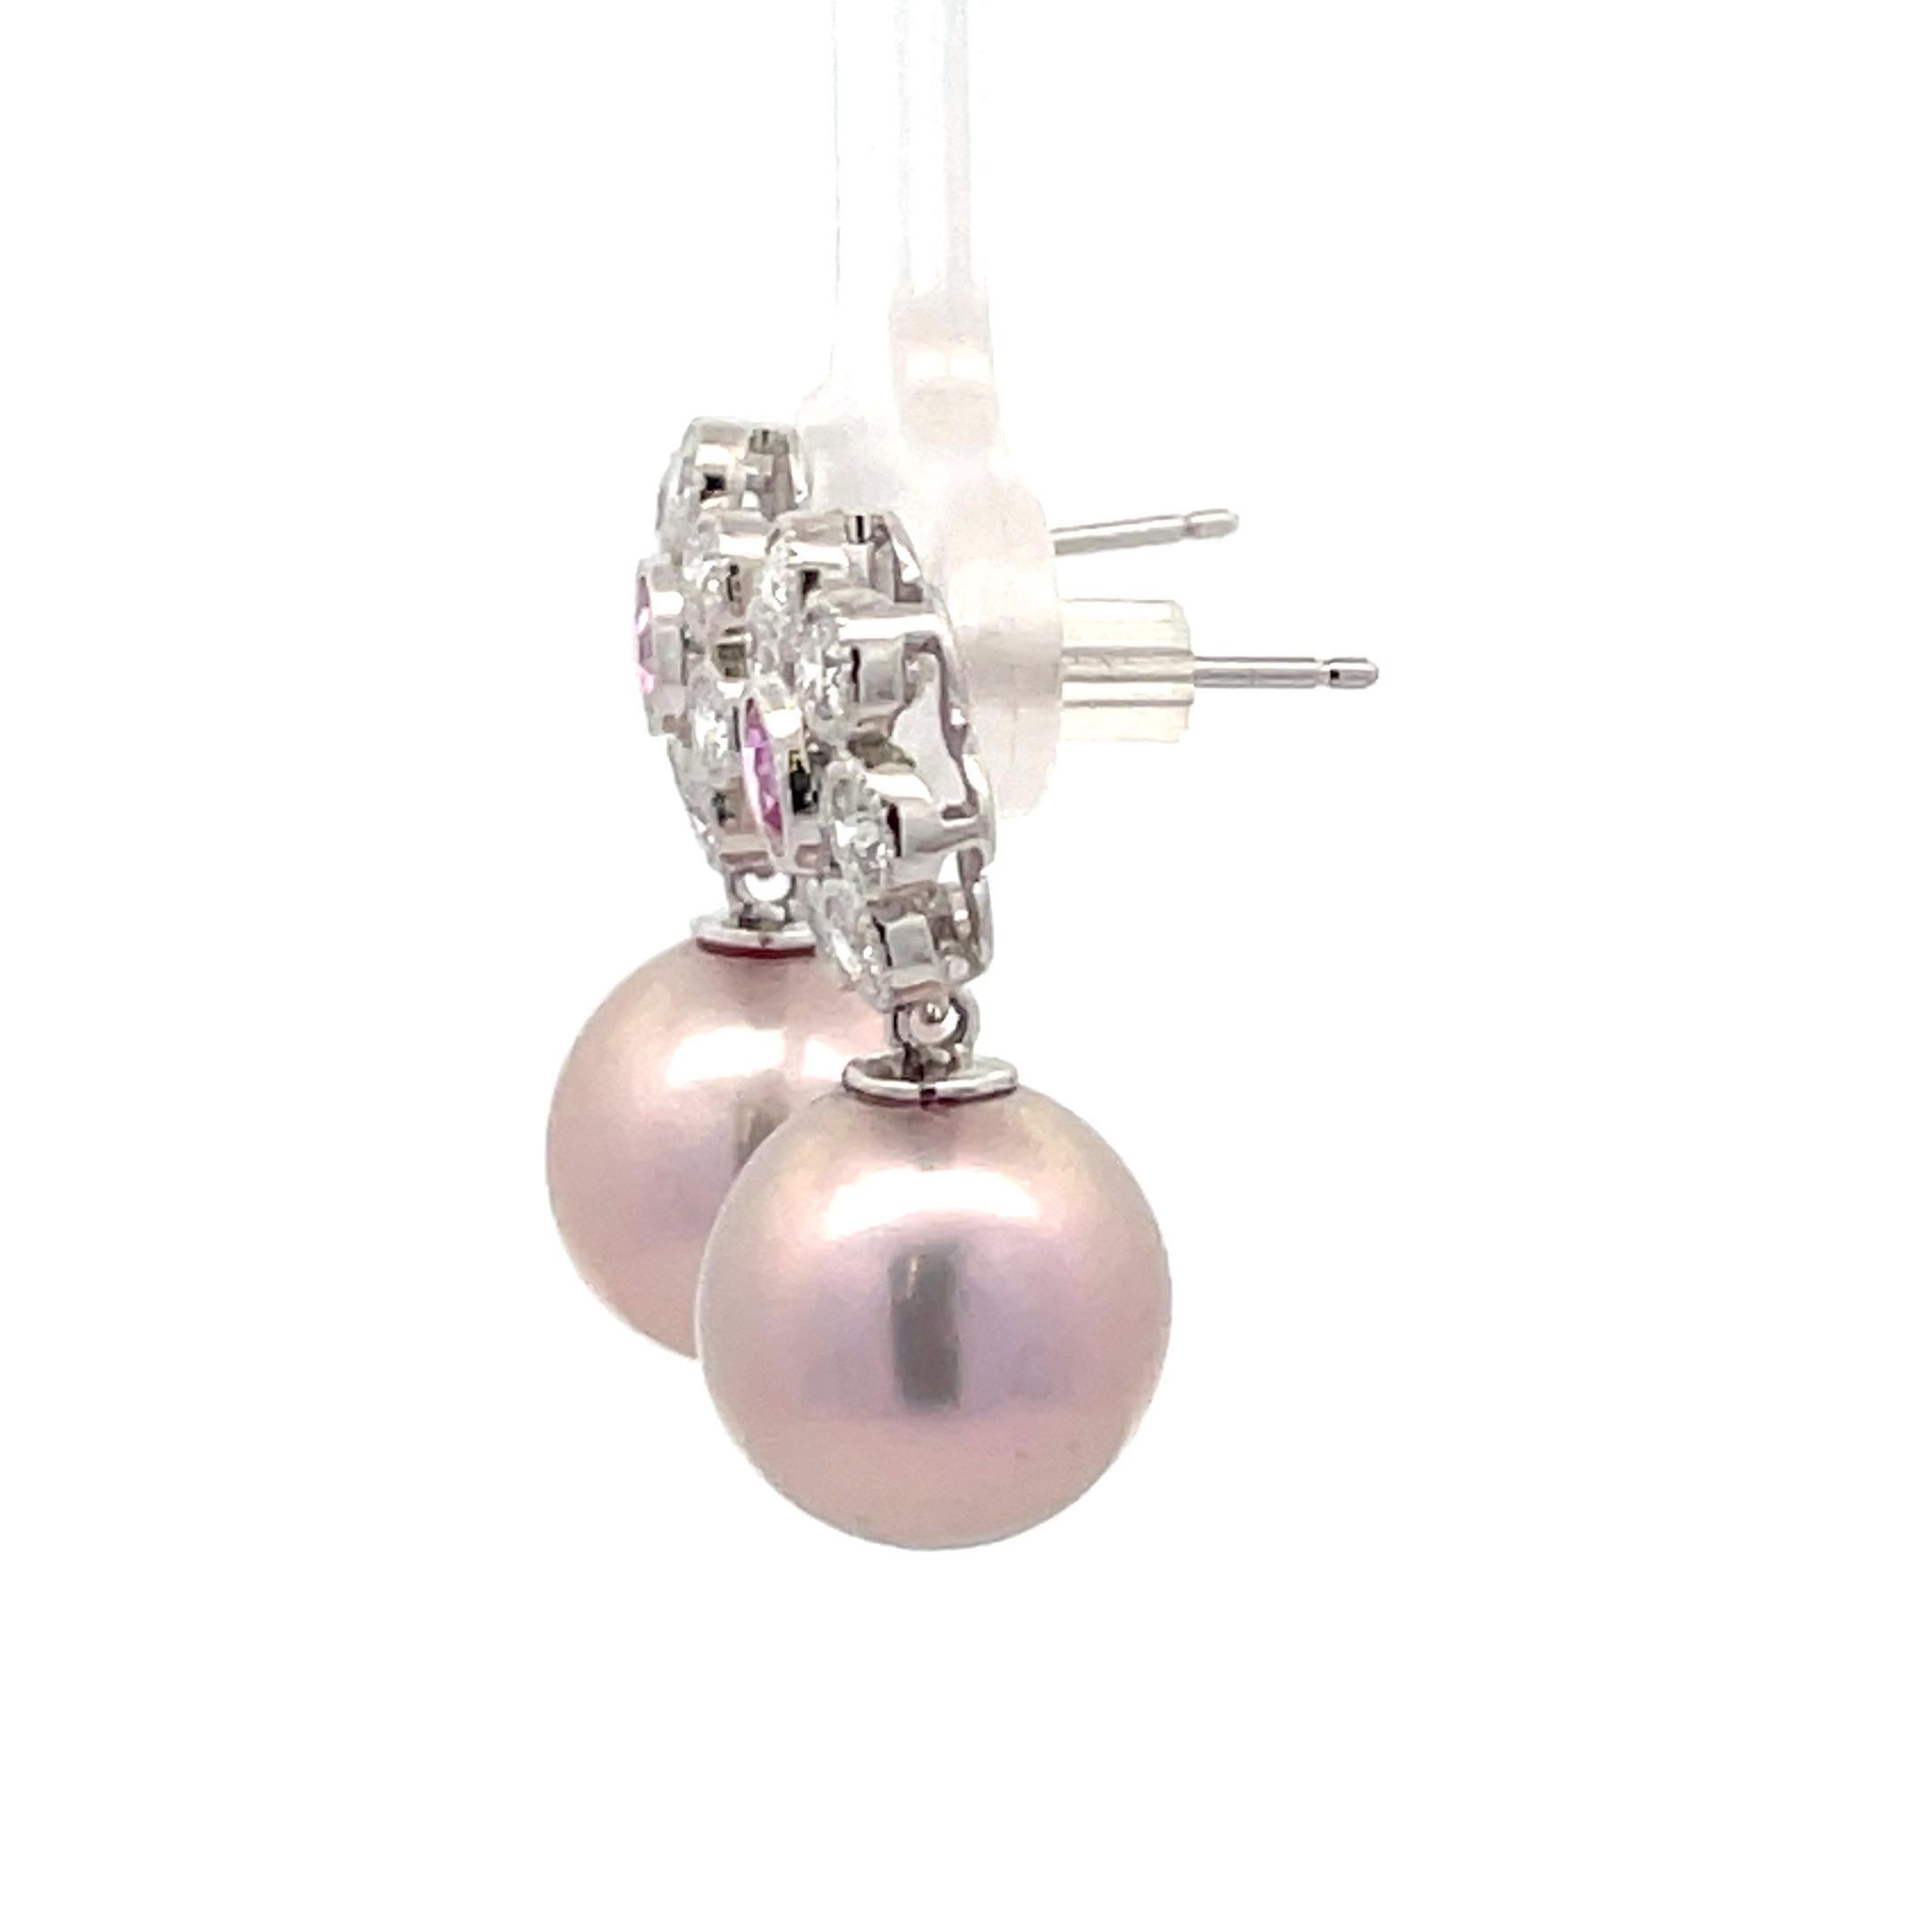 14 Karat White Gold drop earrings featuring two Pink Sapphires weighing 0.40 Carats surrounded by 14 round brilliants, 0.40 carats, and two pink Freshwater pearls measuring 10-11 MM.

Pearls earrings can be changed to Tahitian, Pink, Gold or South